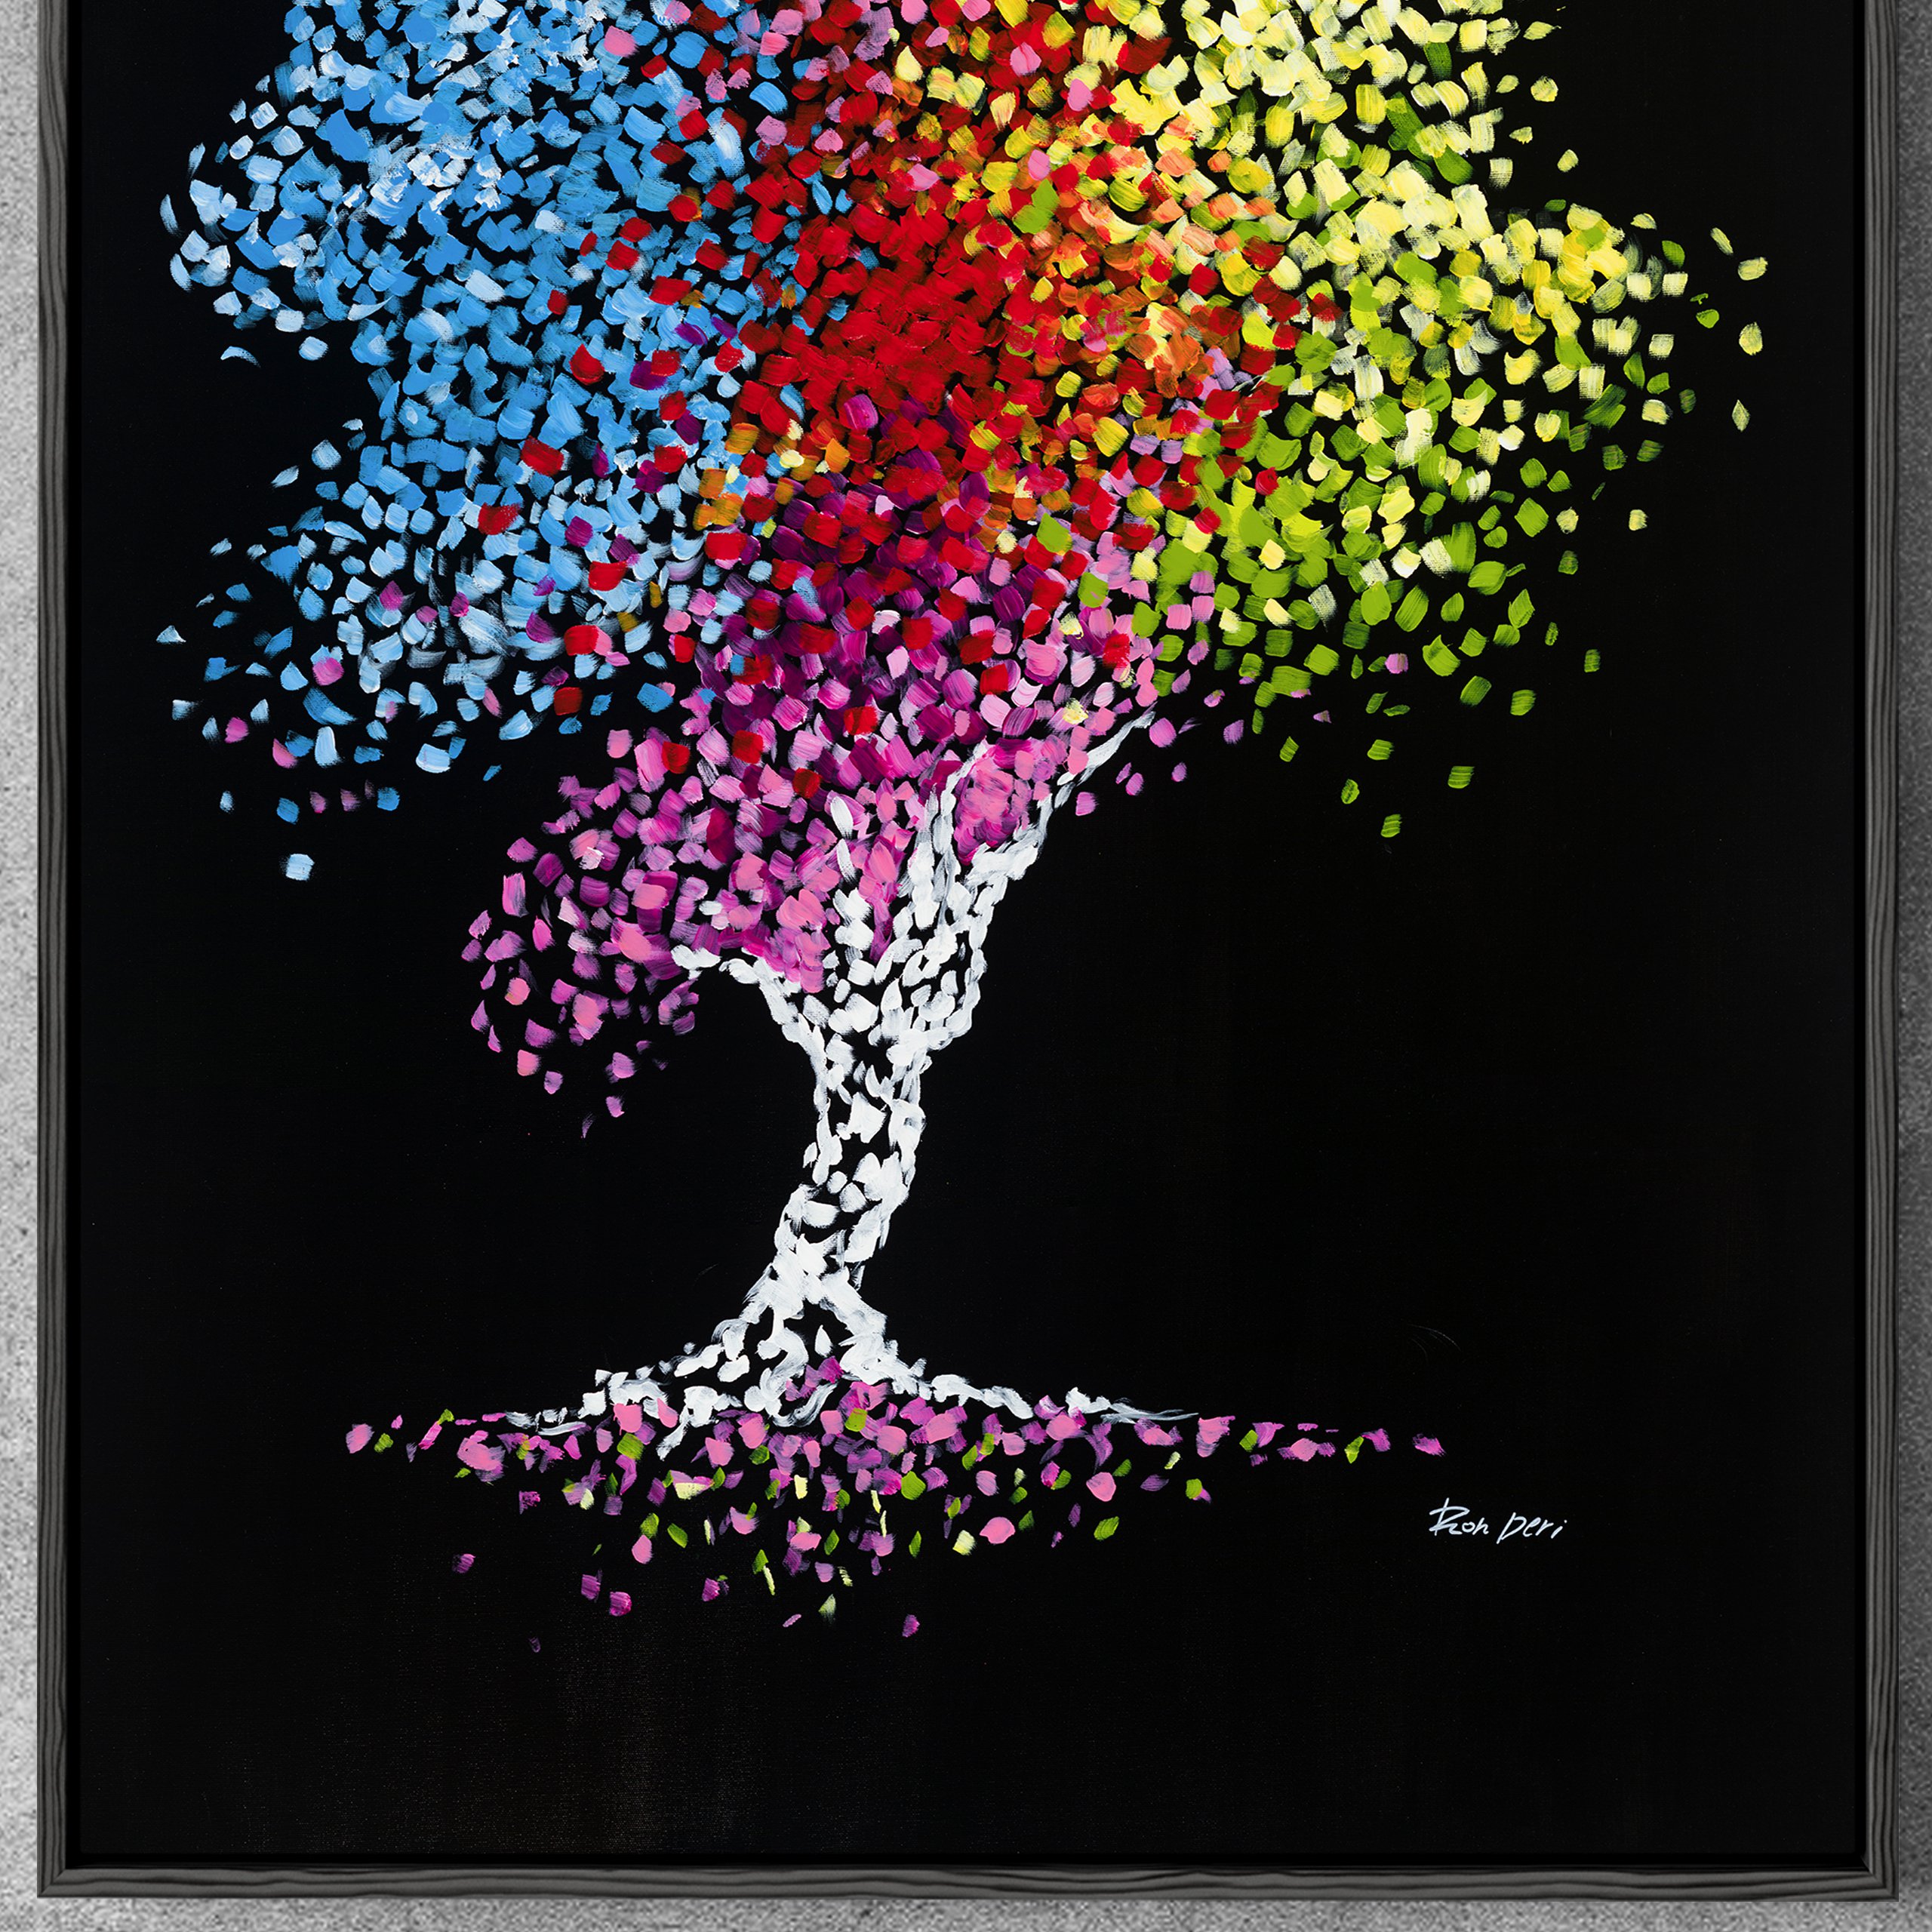 tree of life painting